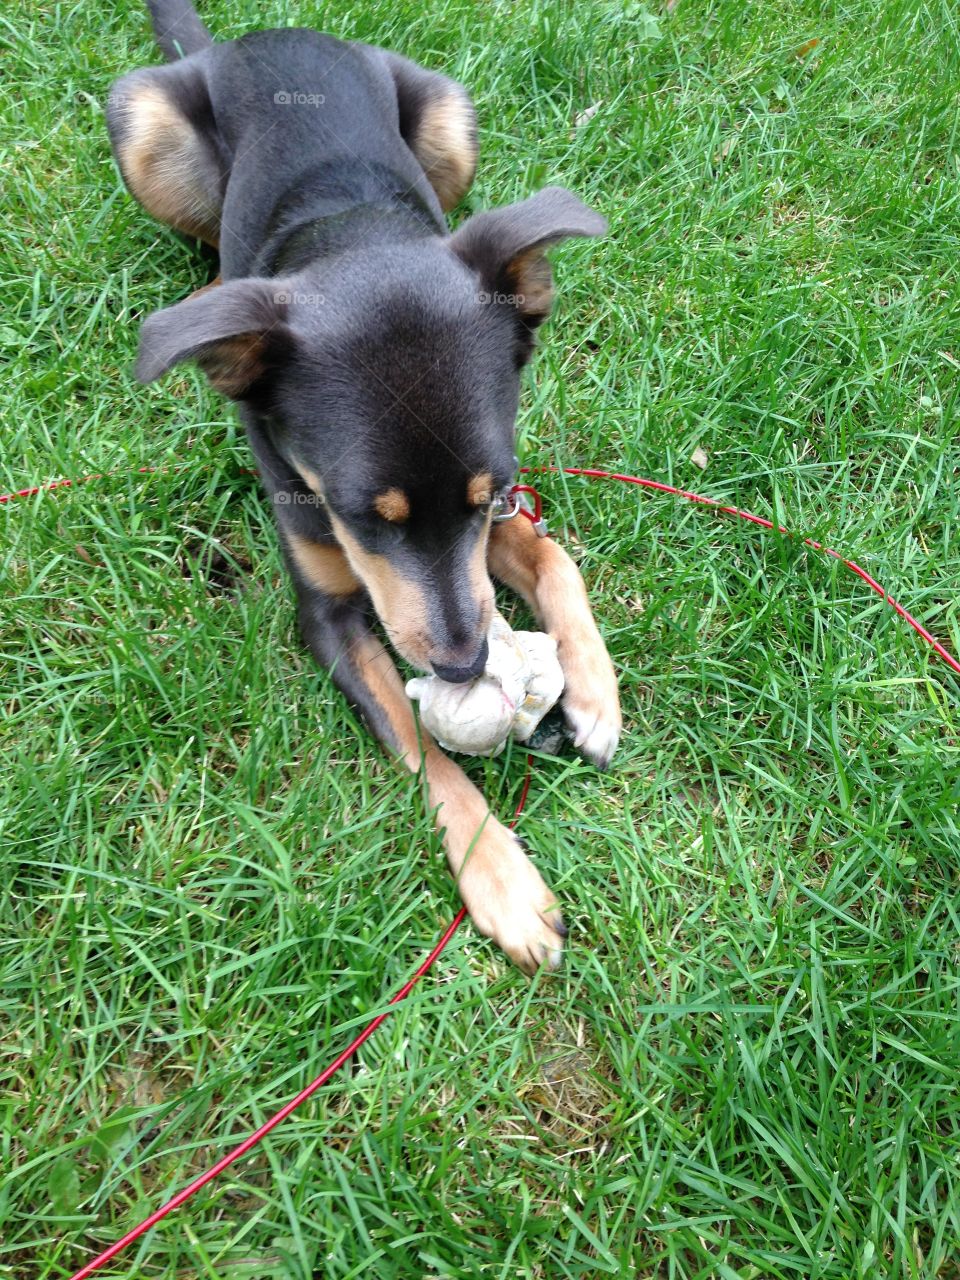 Cute dog lays in grass while happily destroying a chew toy!